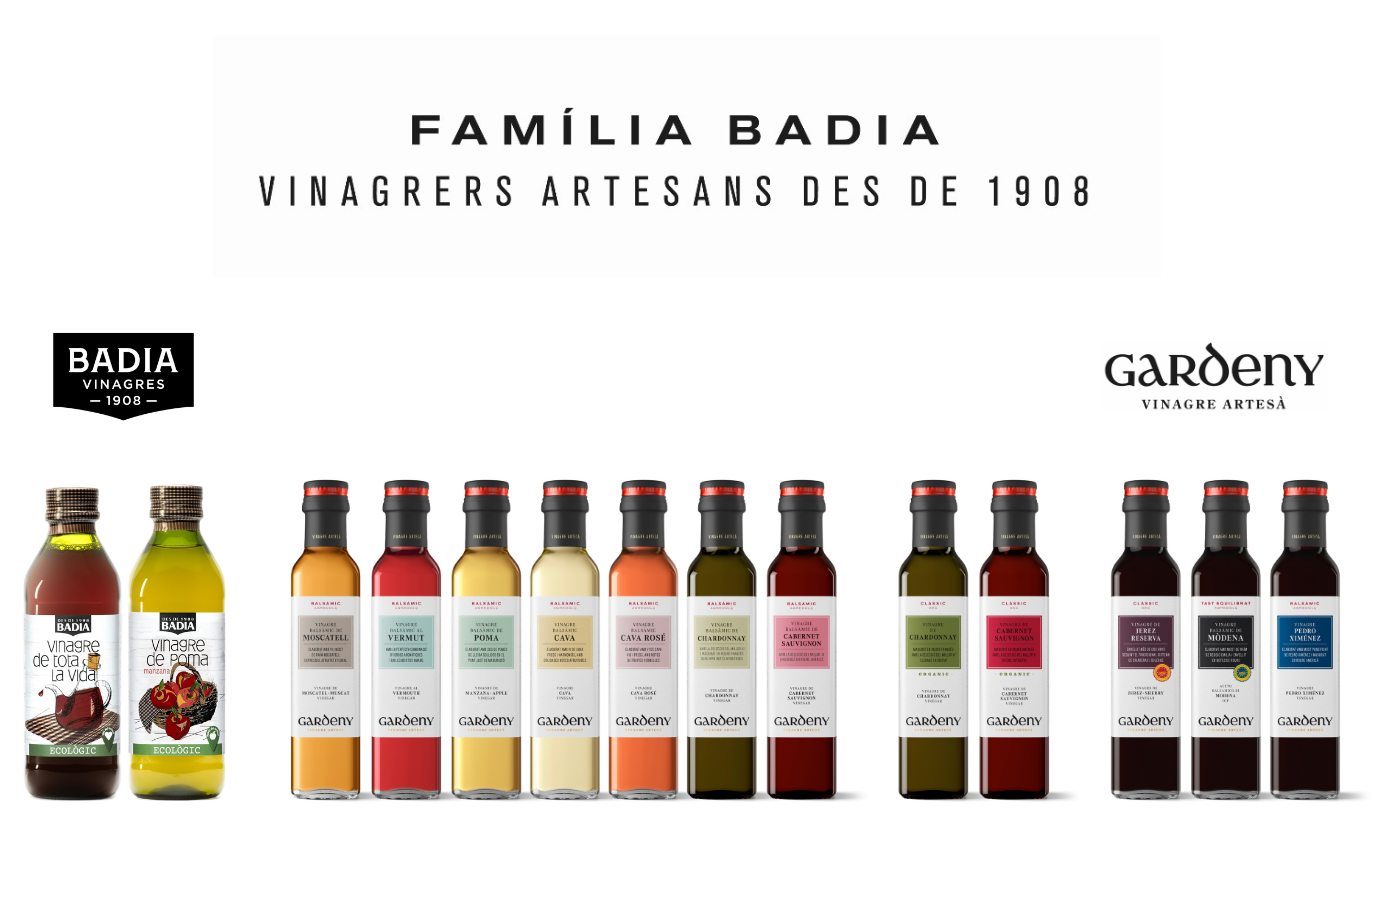 Badia and Gardeny: two brands, one family